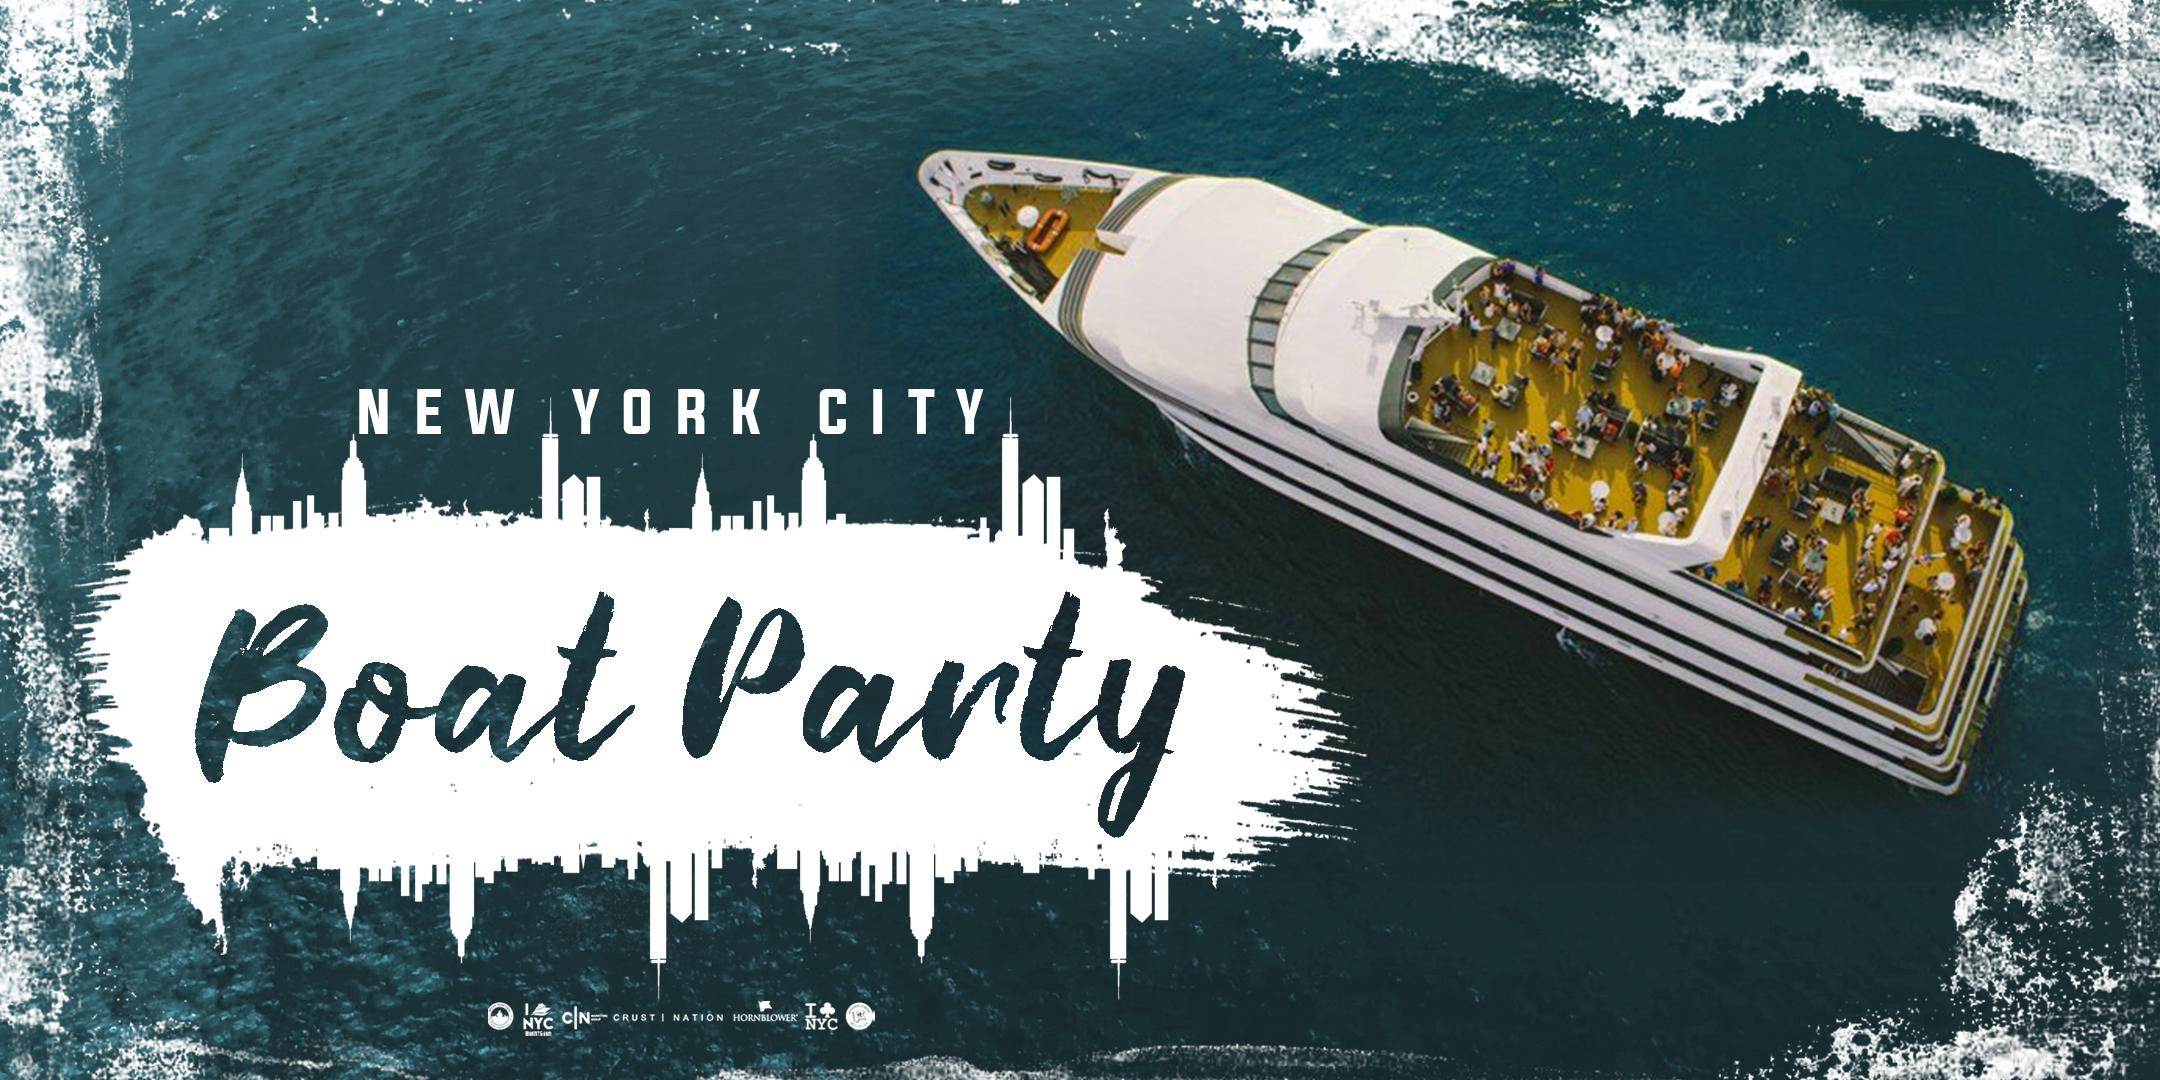 Saturday Sunset Yacht Cruise in Manhattan - Independence Day Sightseeing Boat Party